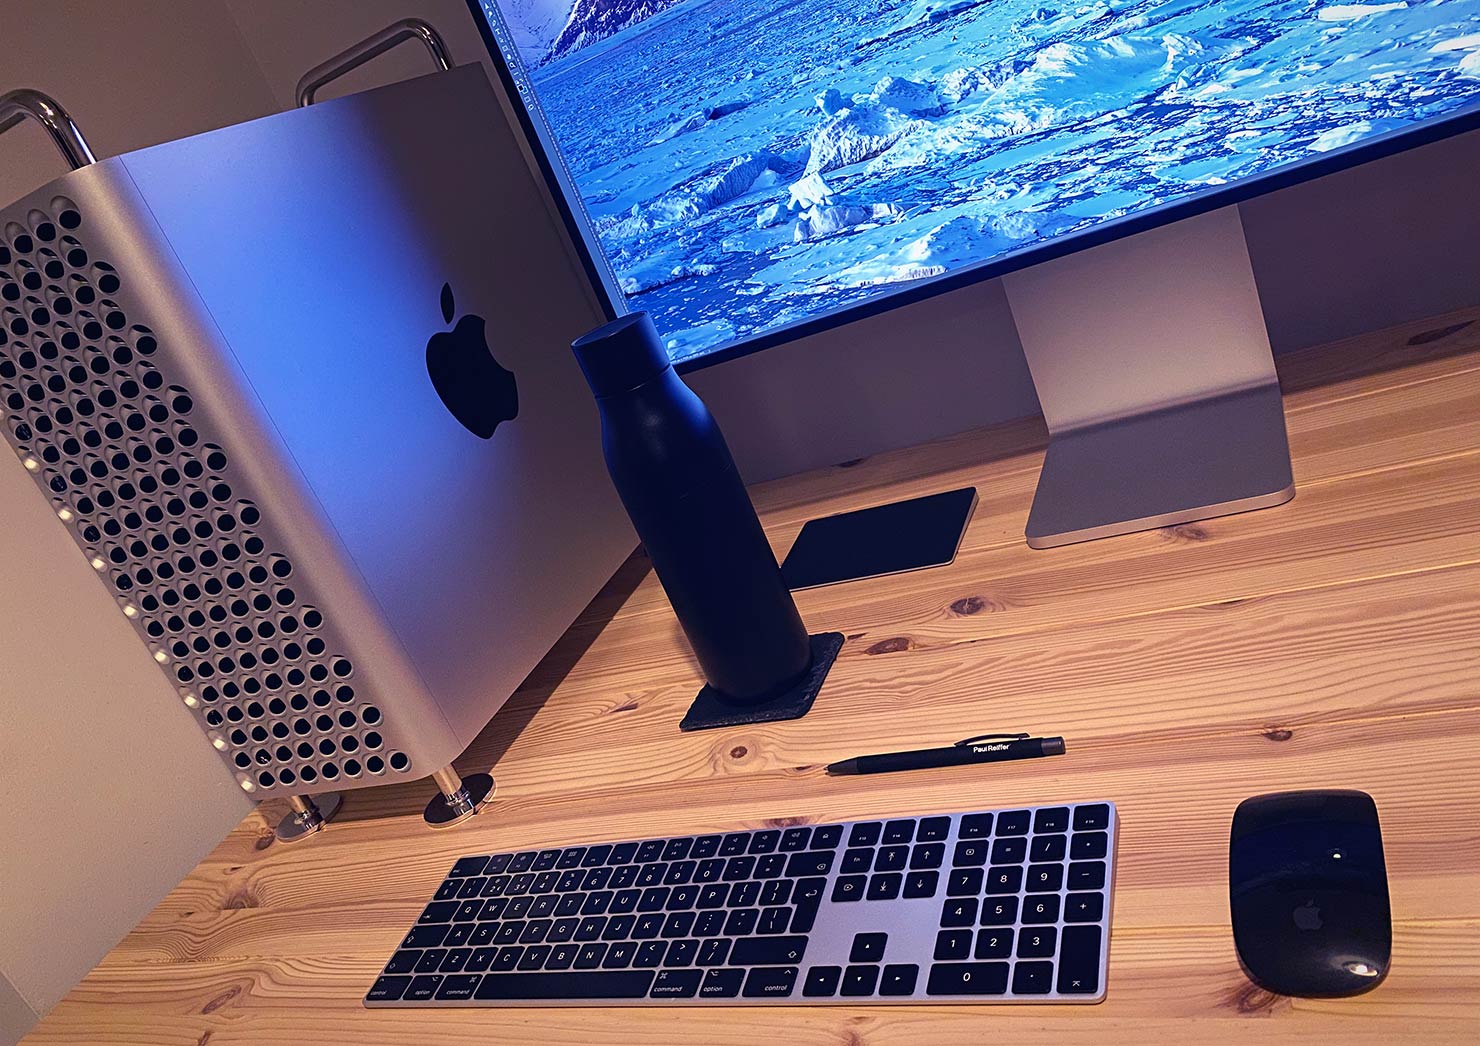 Desk Setup Photo Editing Tower Apple Mac Pro XDR Display Review 16 Core Dual Vega Radeon Capture One Pro Paul Reiffer Photographer Phase One